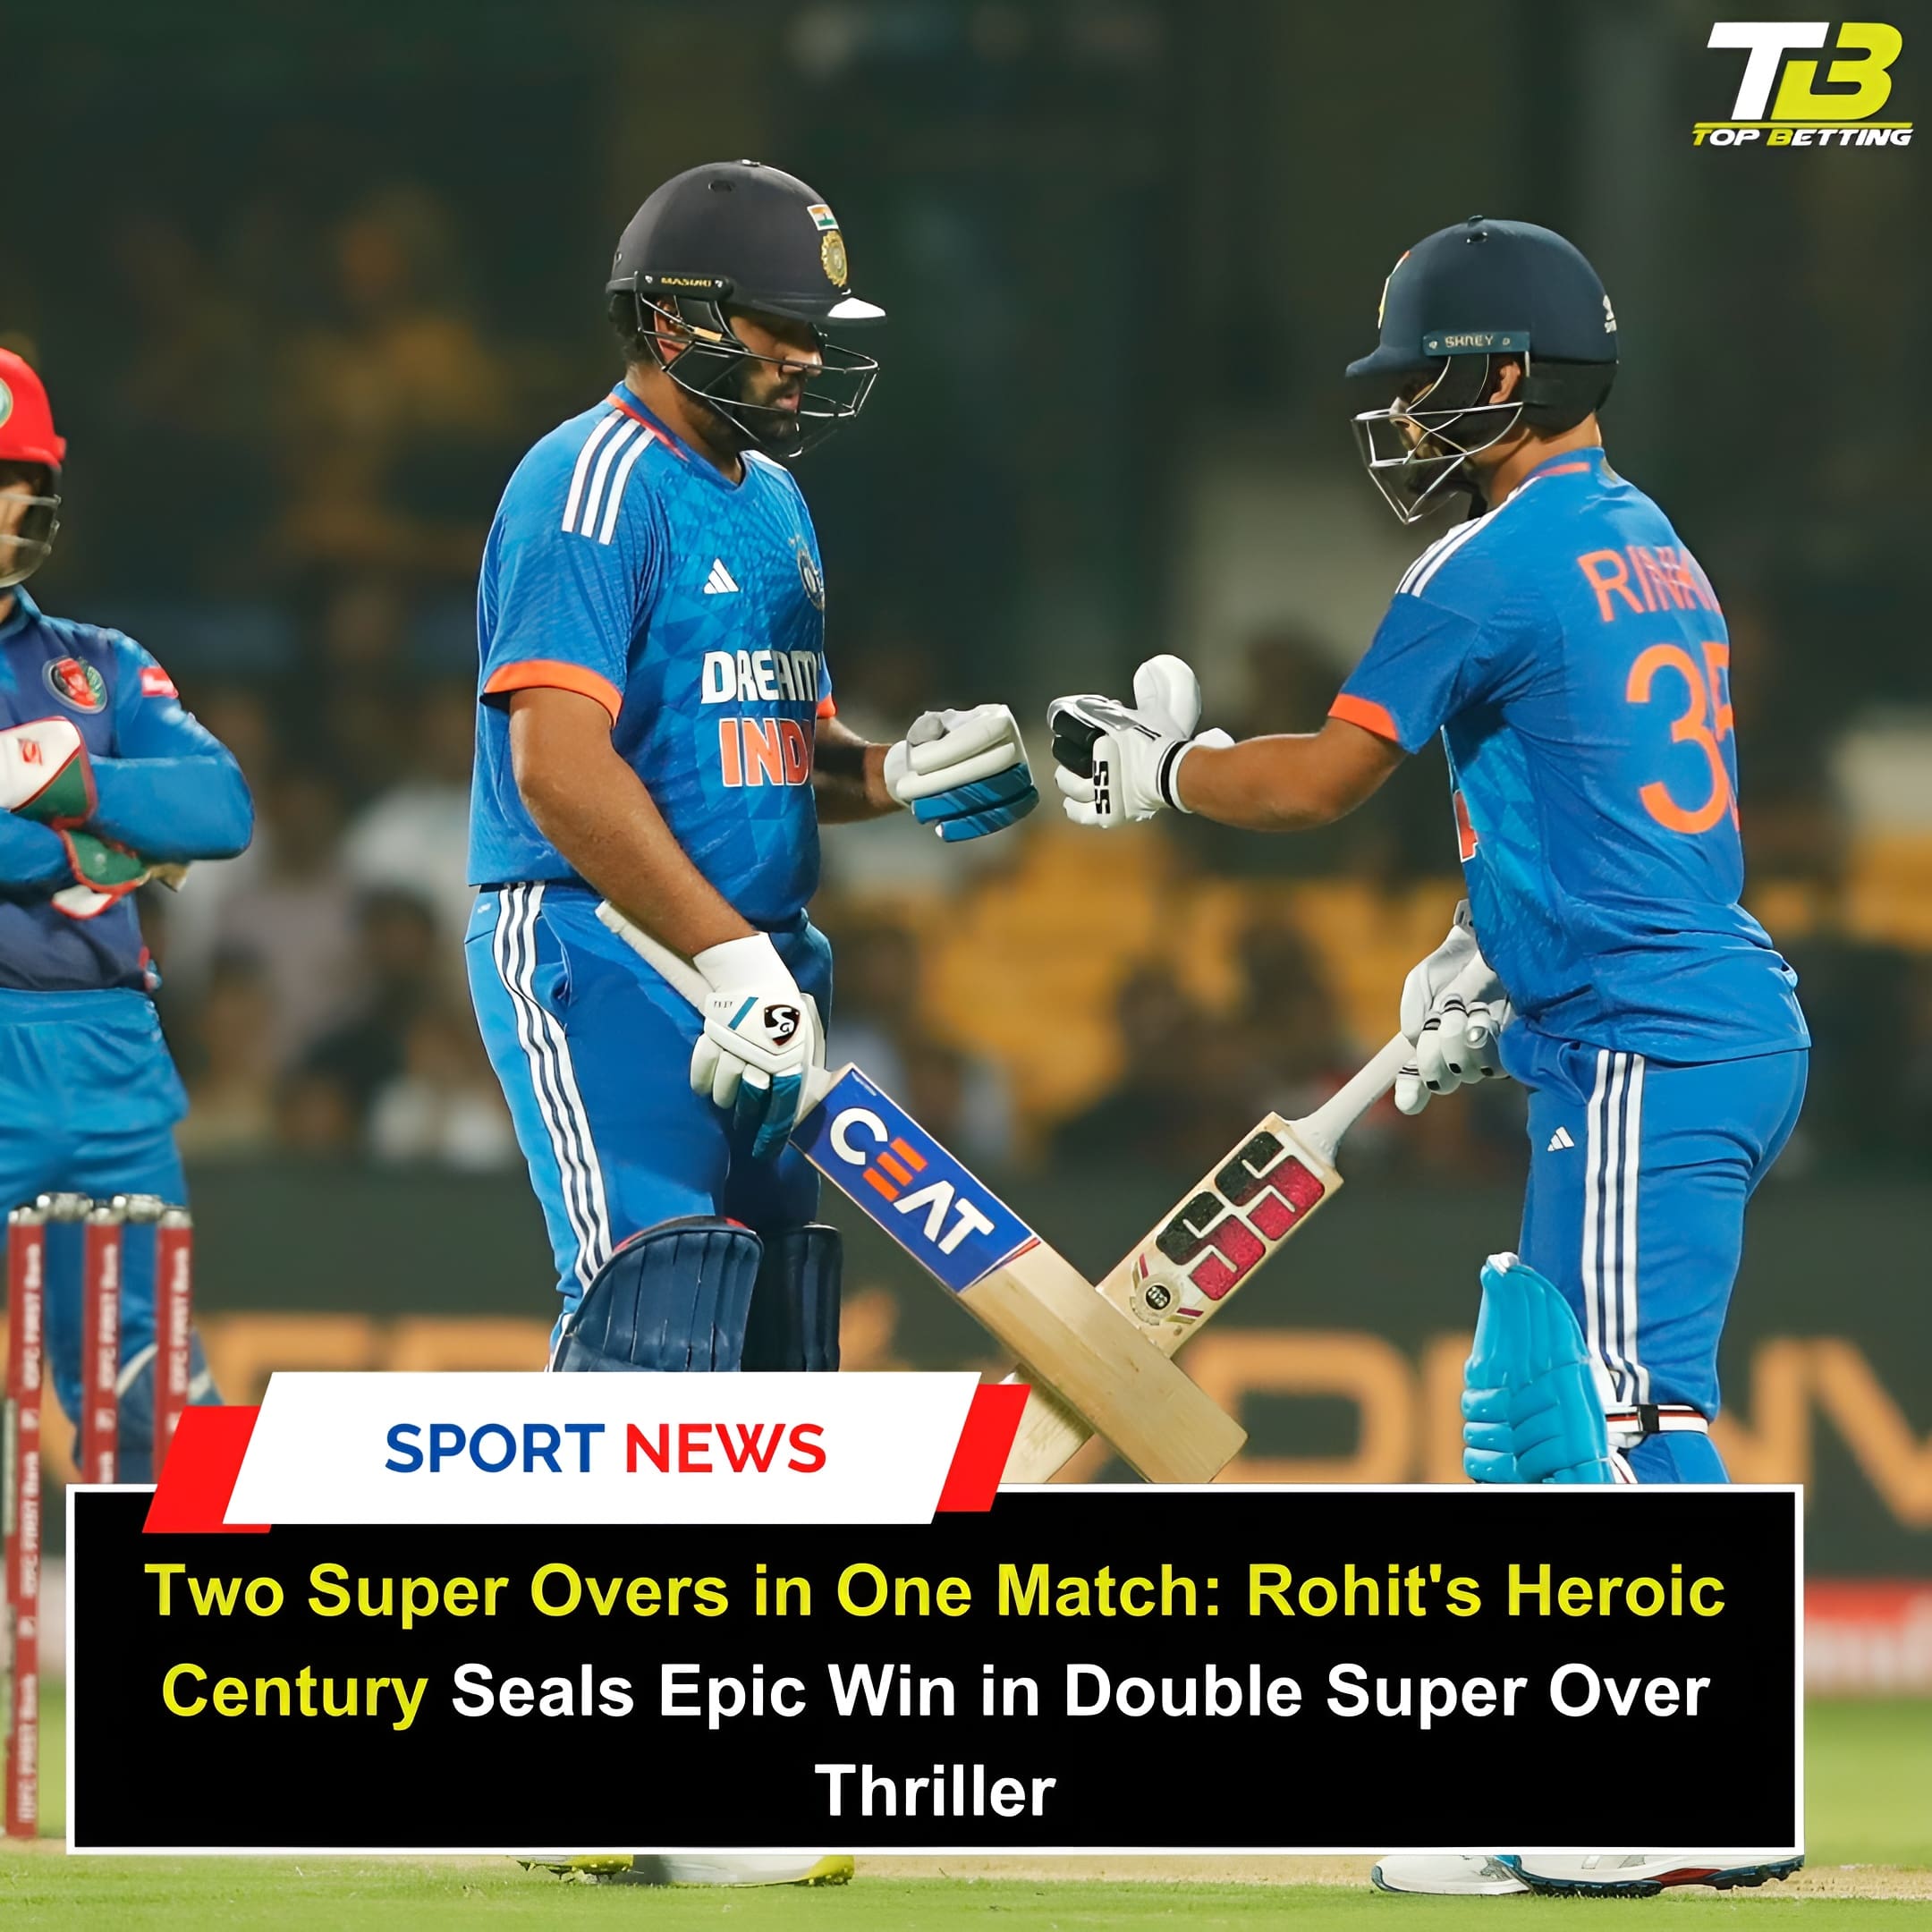 Two Super Overs in One Match: Rohit’s Heroic Century Seals Epic Win in Double Super Over Thriller